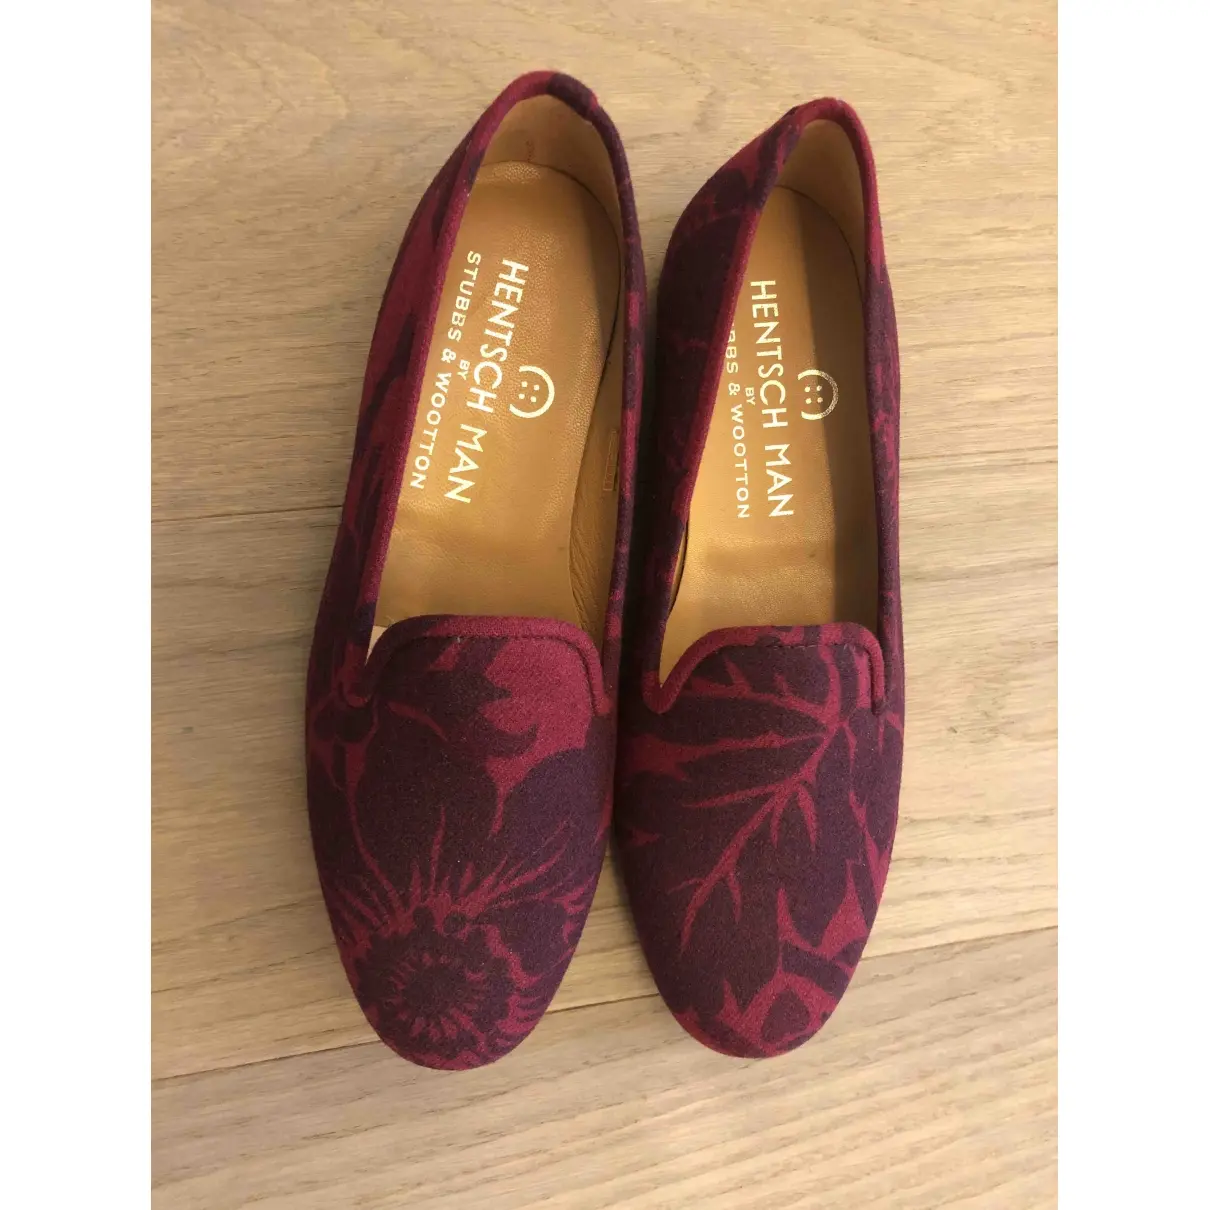 Stubbs & Wootton Cloth flats for sale